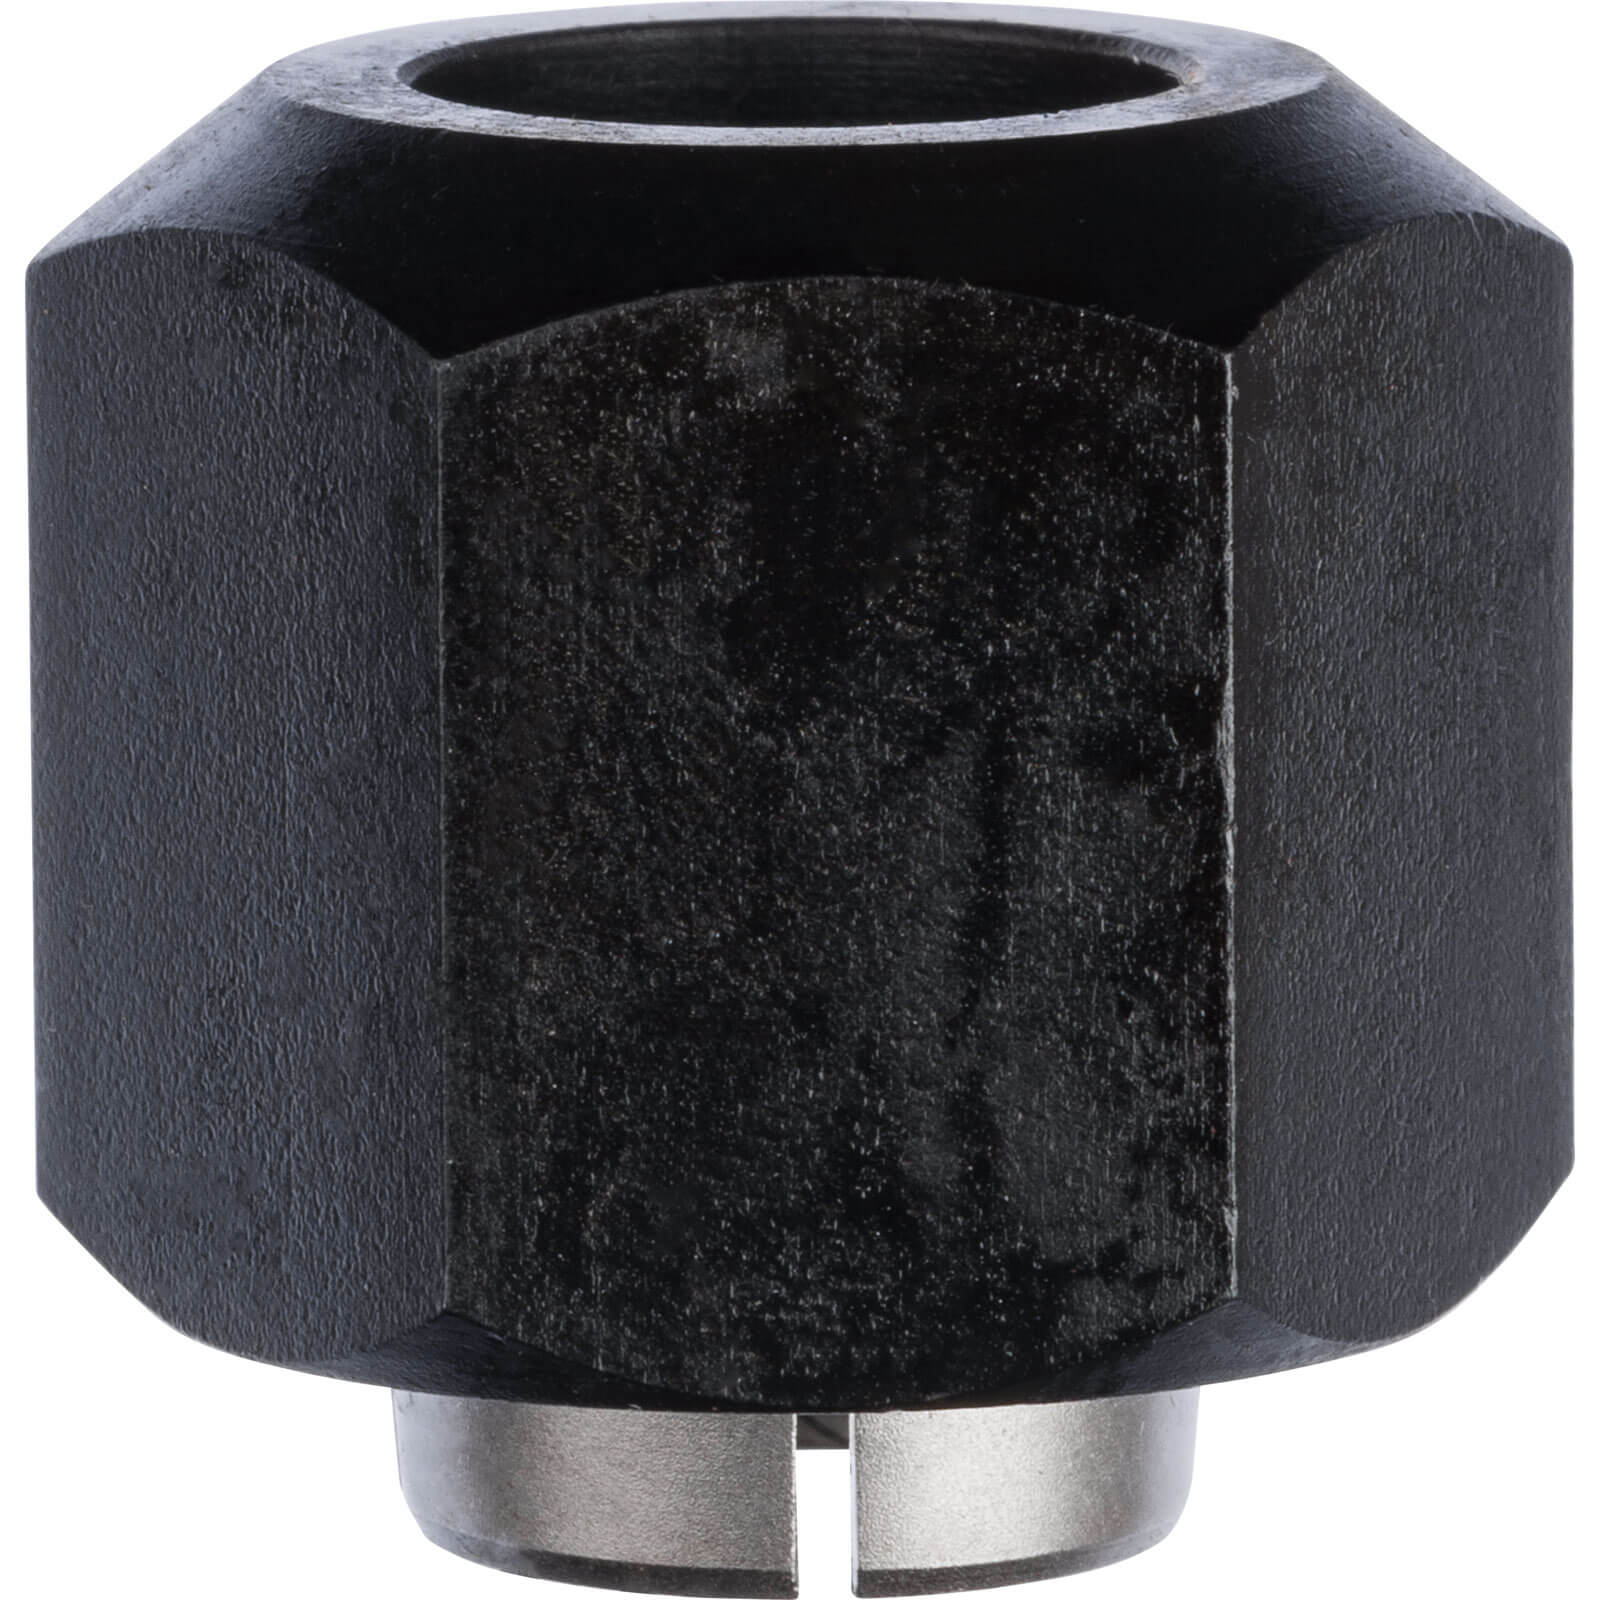 Photo of Bosch Router Collet 12mm